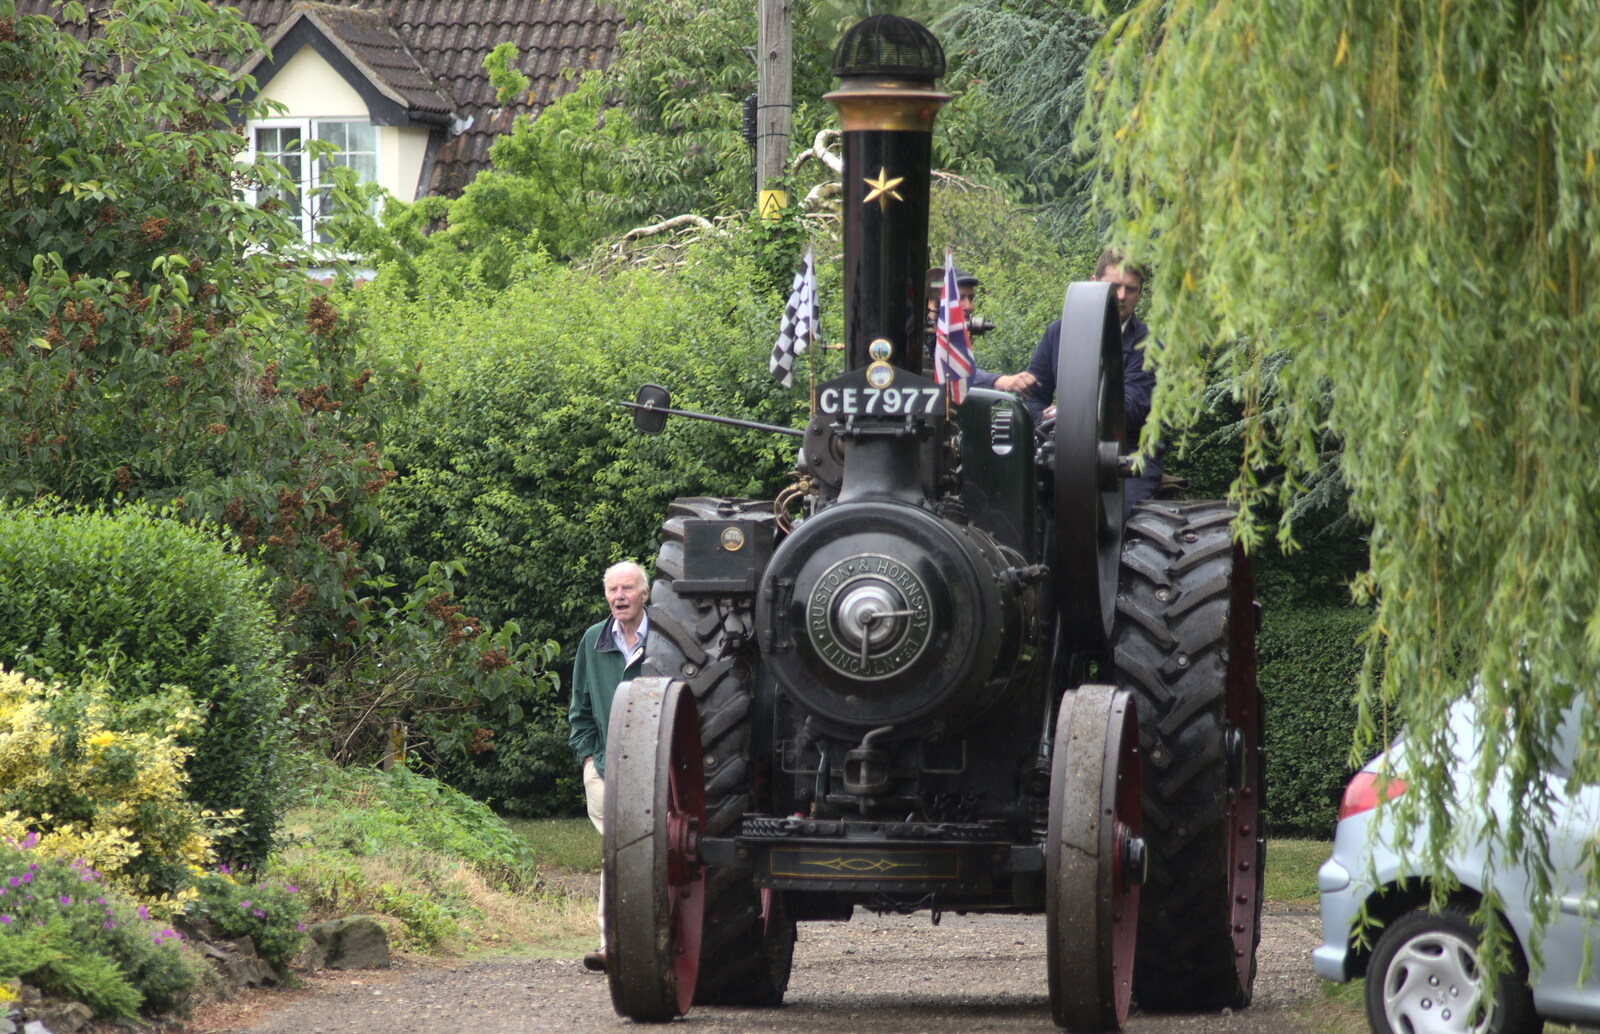 Grandad follows Oliver as it trundles up the drive from Thrandeston Pig Roast, Thrandeston Little Green, Suffolk - 28th June 2015